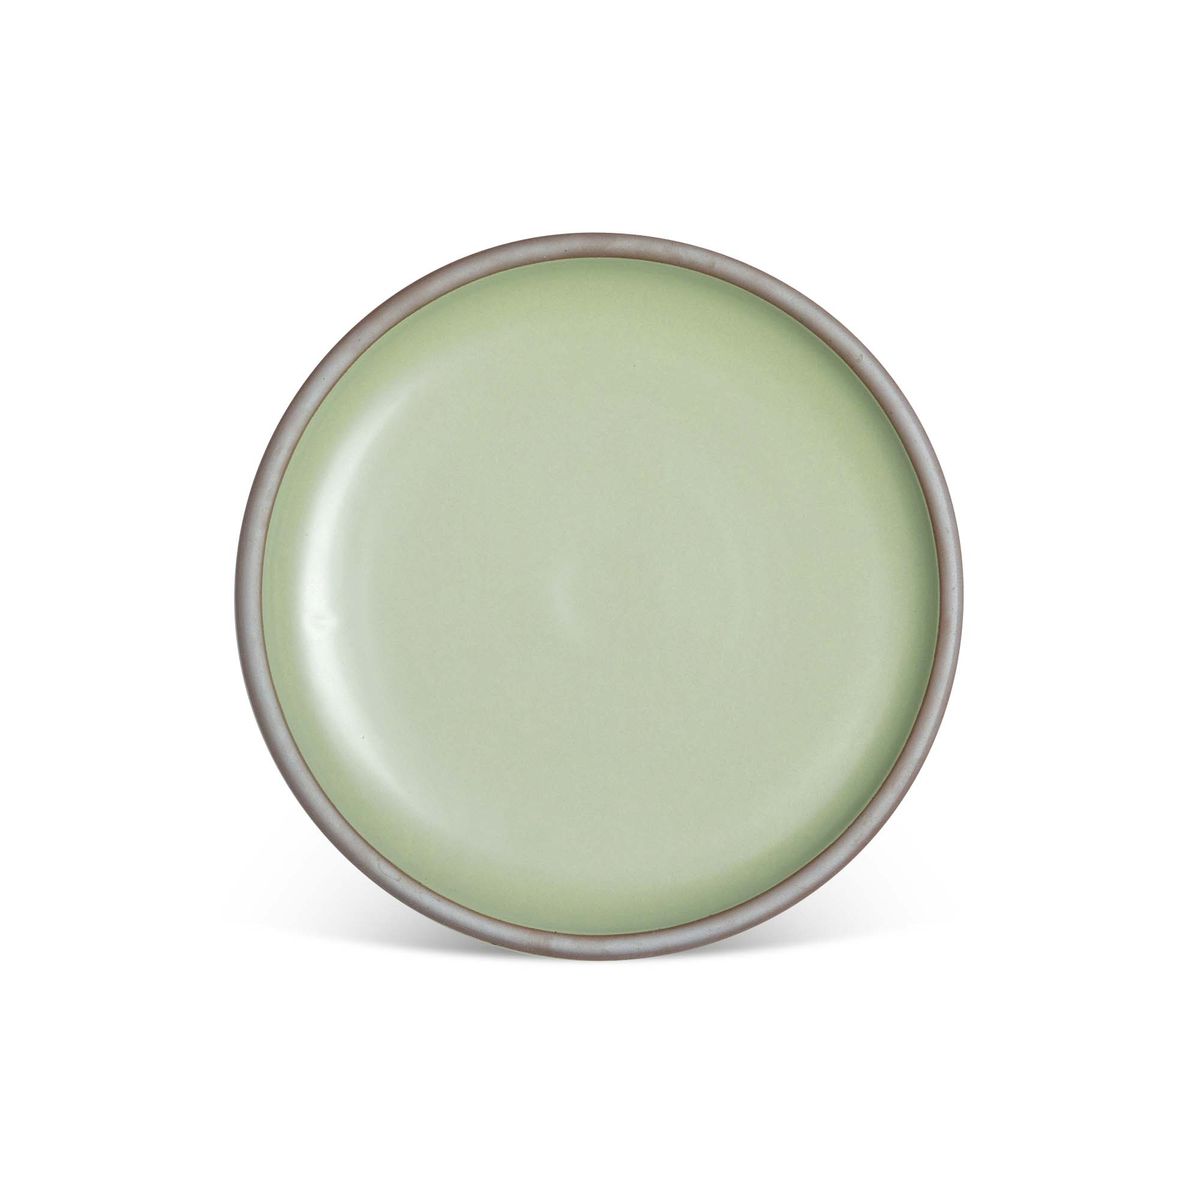 A dinner sized ceramic plate in a calming sage green color featuring iron speckles and an unglazed rim